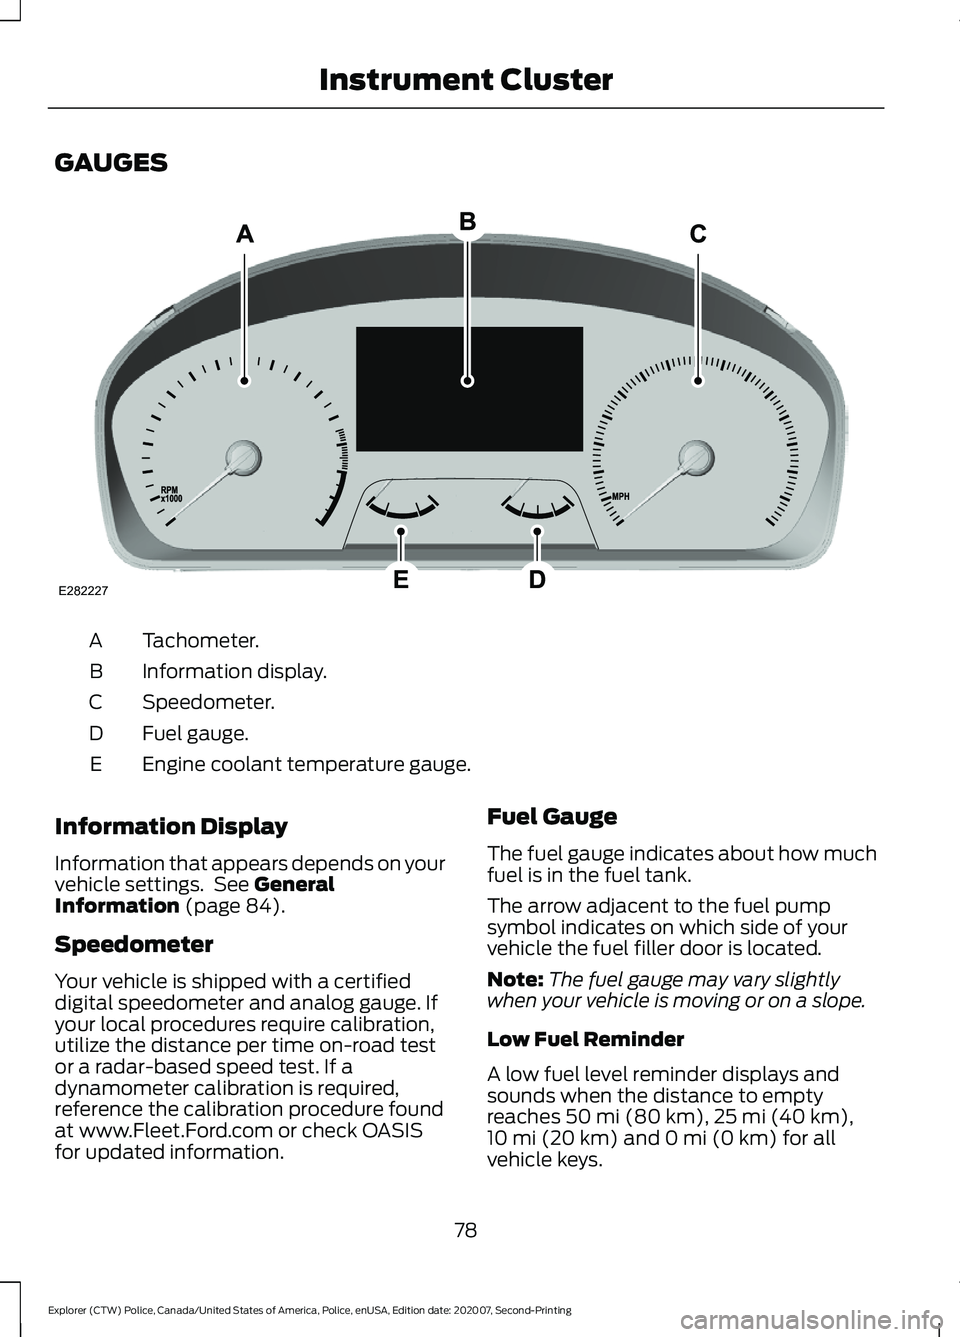 FORD POLICE INTERCEPTOR 2021  Owners Manual GAUGES
Tachometer.
A
Information display.
B
Speedometer.
C
Fuel gauge.
D
Engine coolant temperature gauge.
E
Information Display
Information that appears depends on your
vehicle settings.  See General